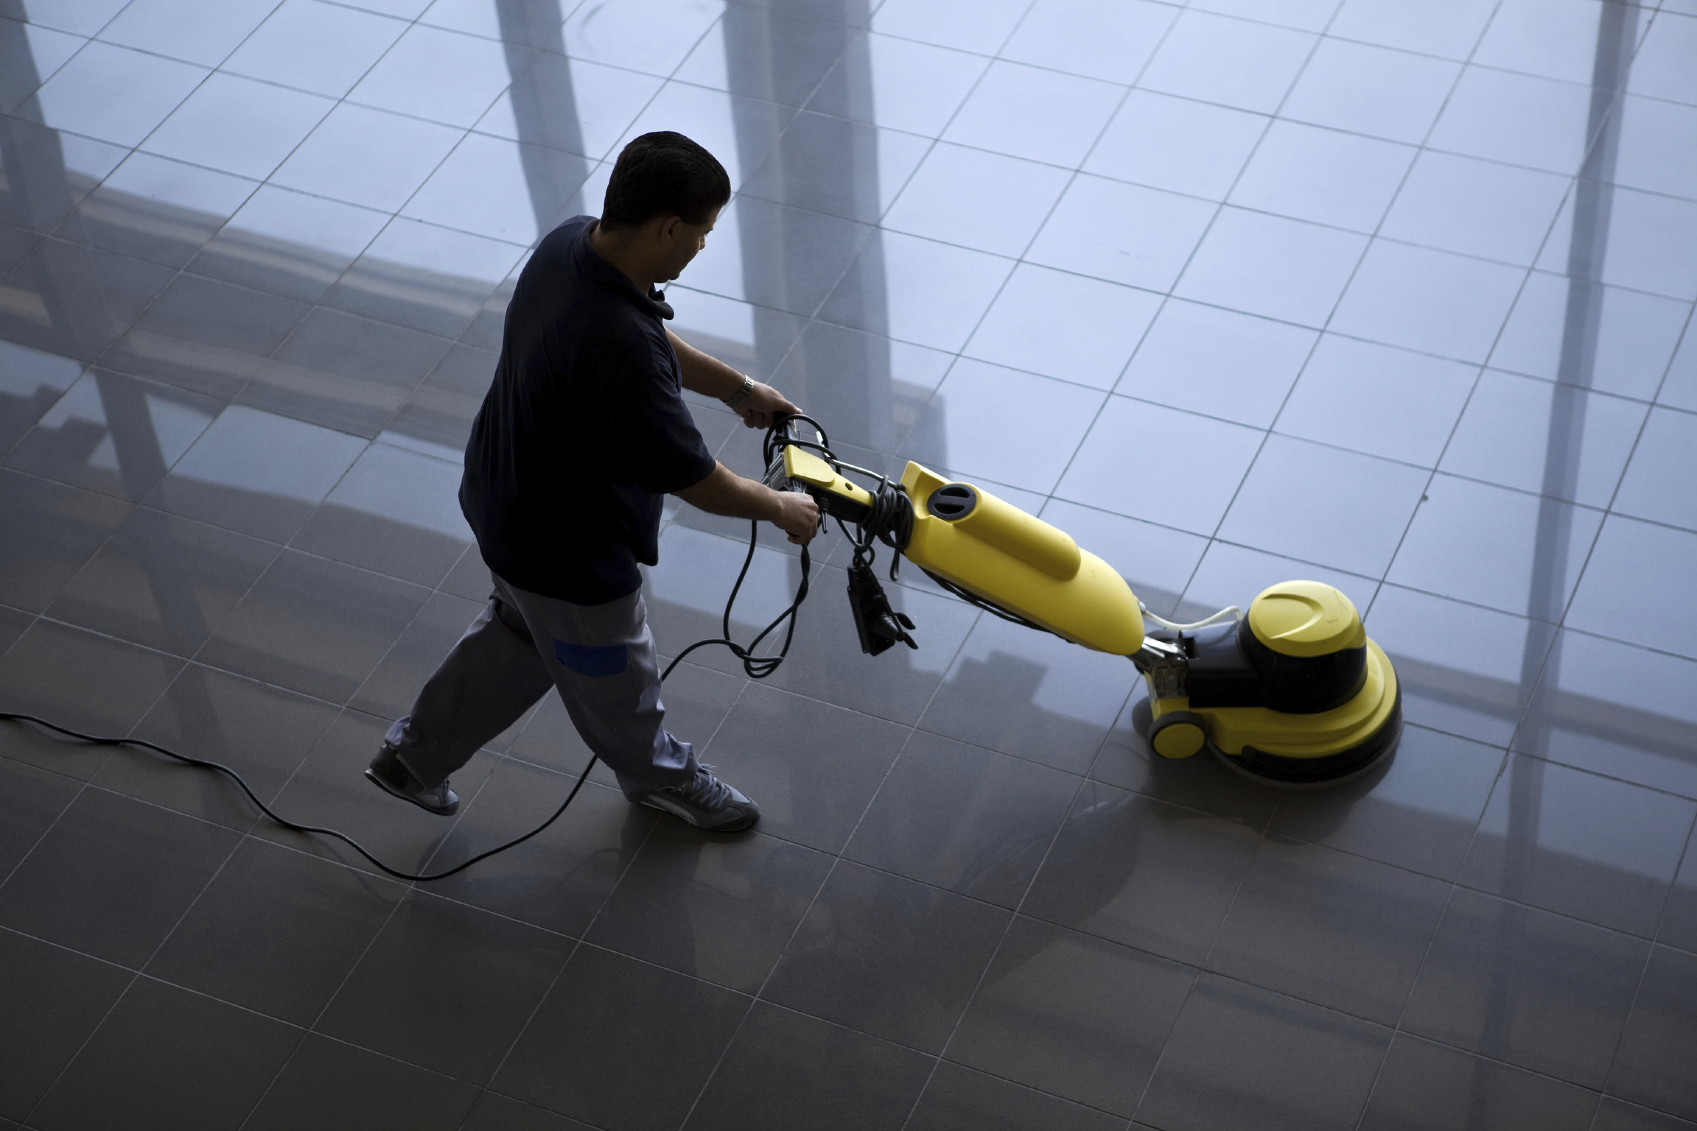 Choosing the right autoscrubber for your facility